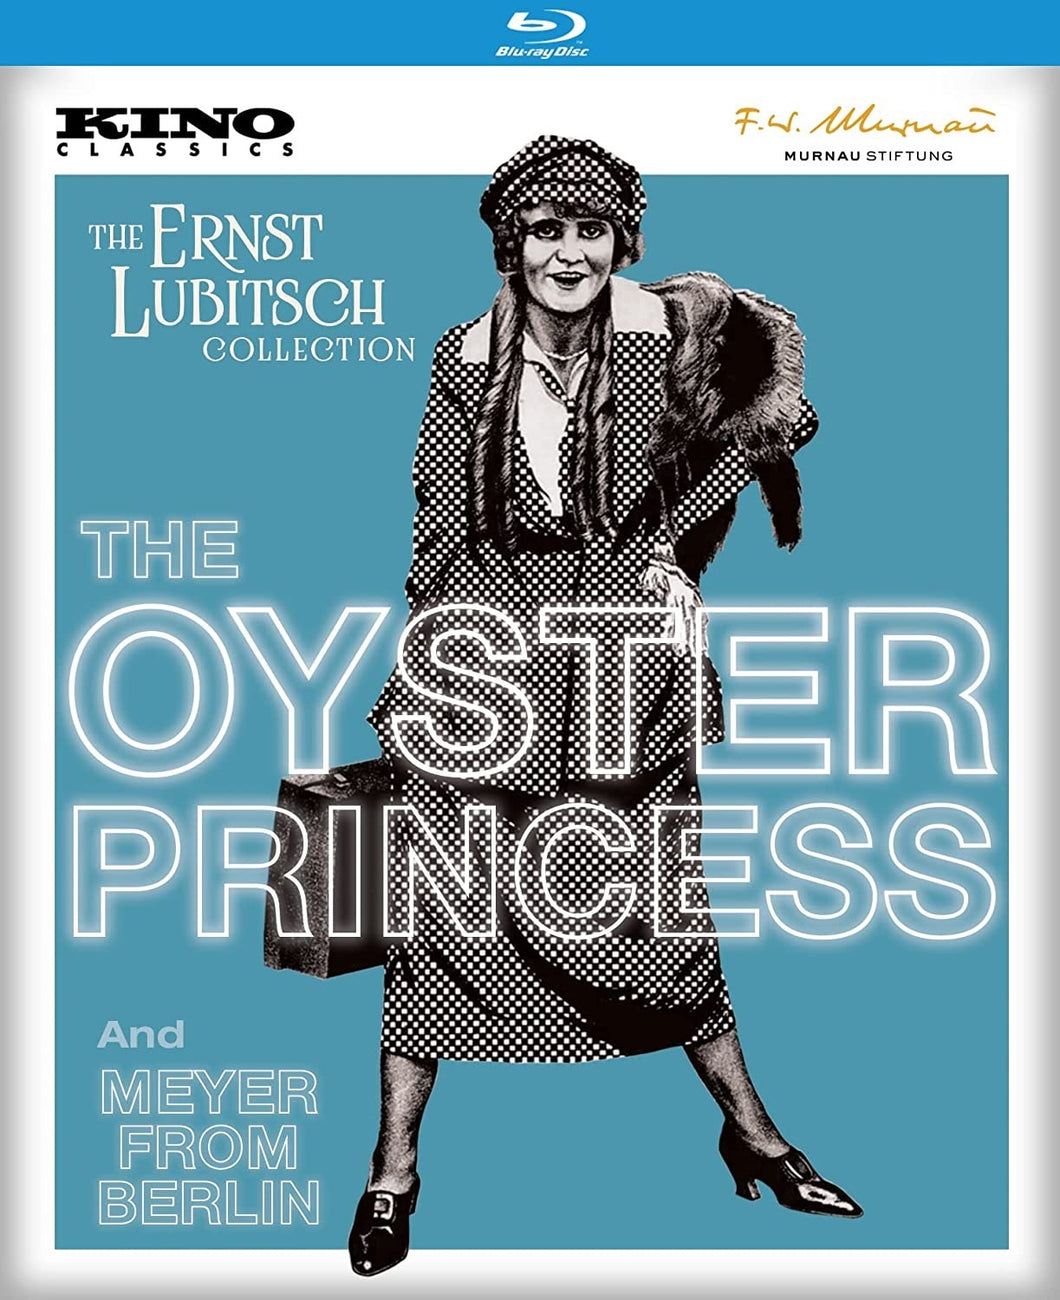 The Oyster Princess (1919) de Ernst Lubitsch - front cover